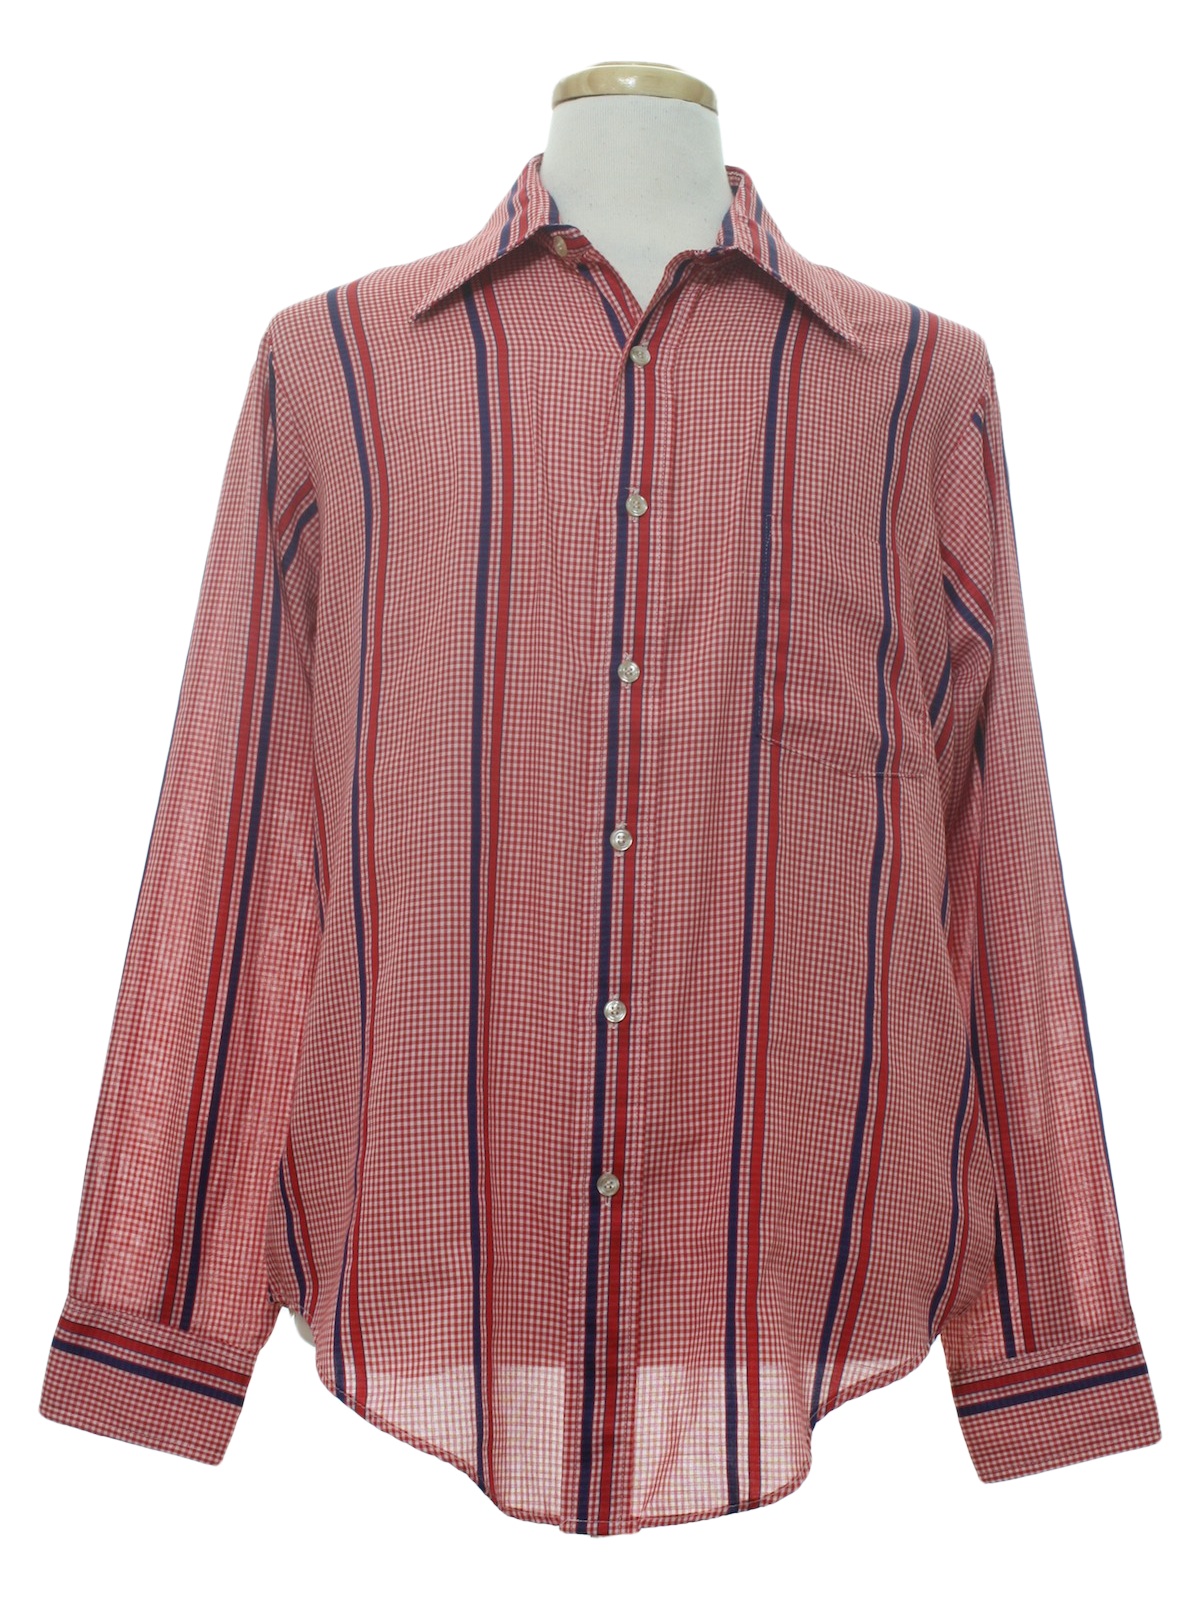 white and red button up shirt men